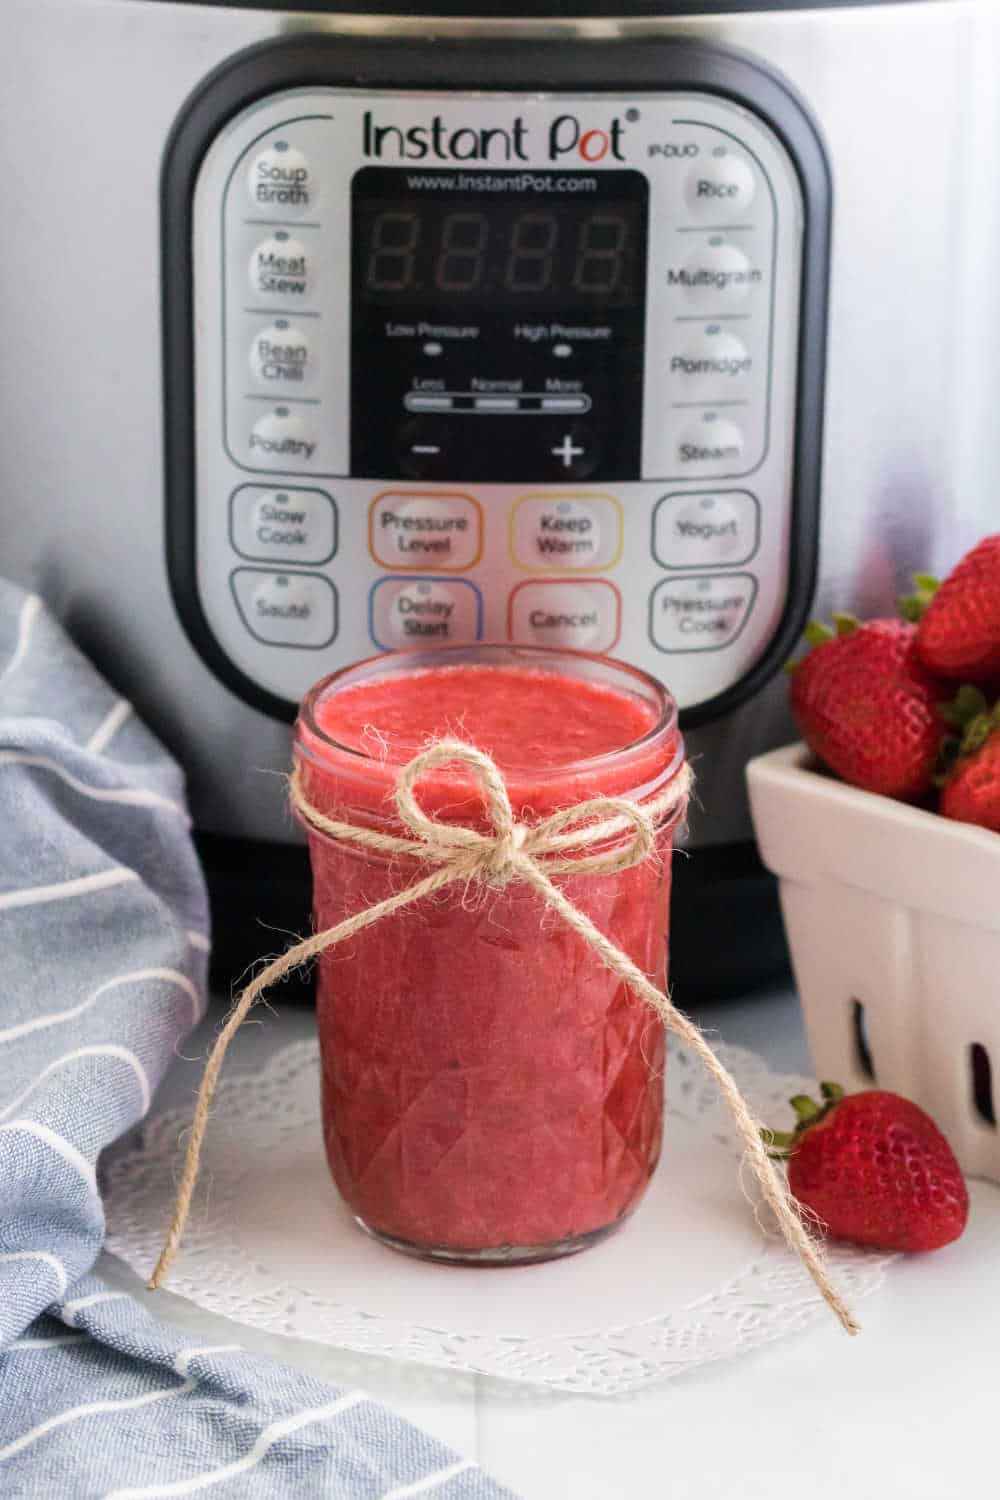 A jar of strawberry jam in front of an Instant Pot.